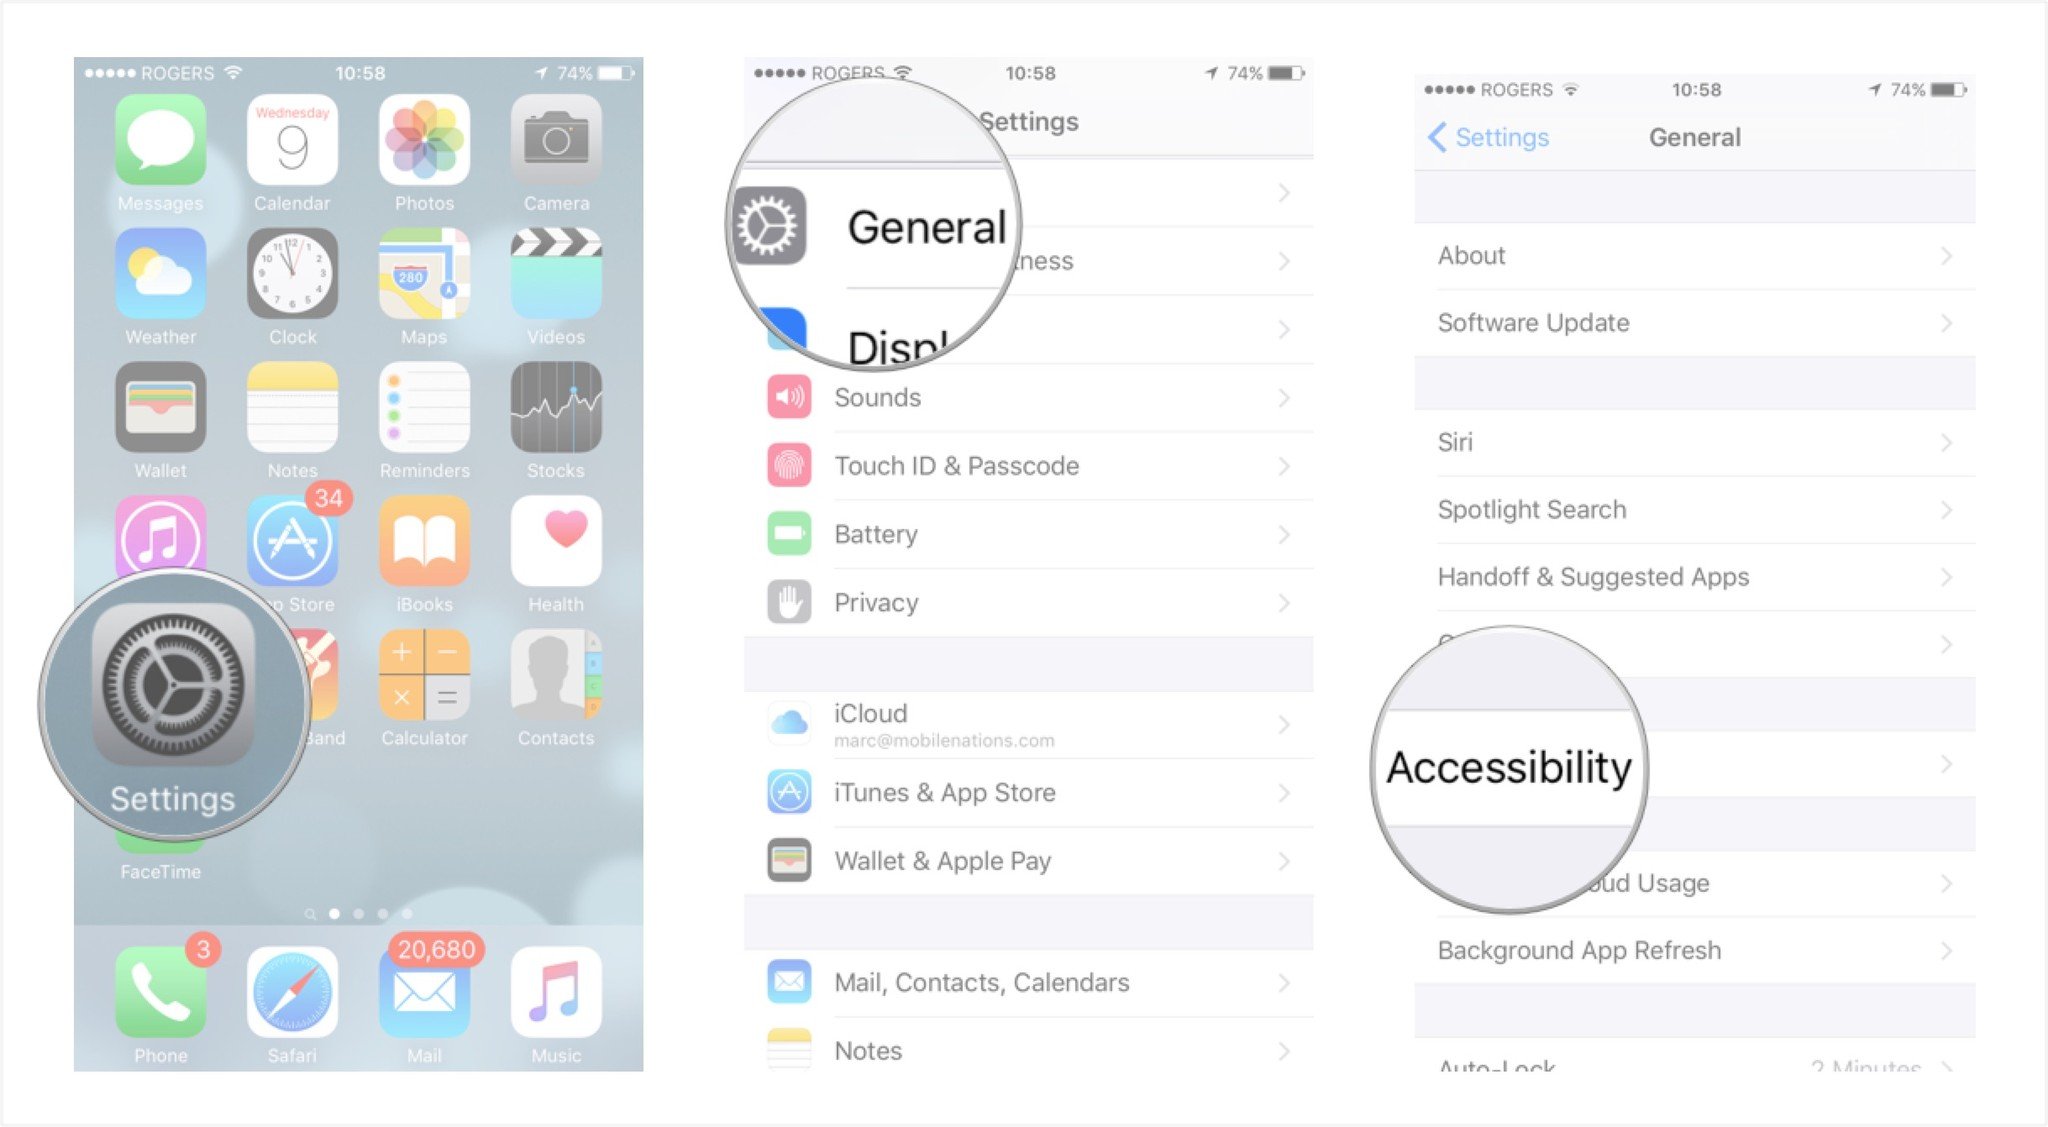 Launch the Settings app tap on General and tap on Accessibility.